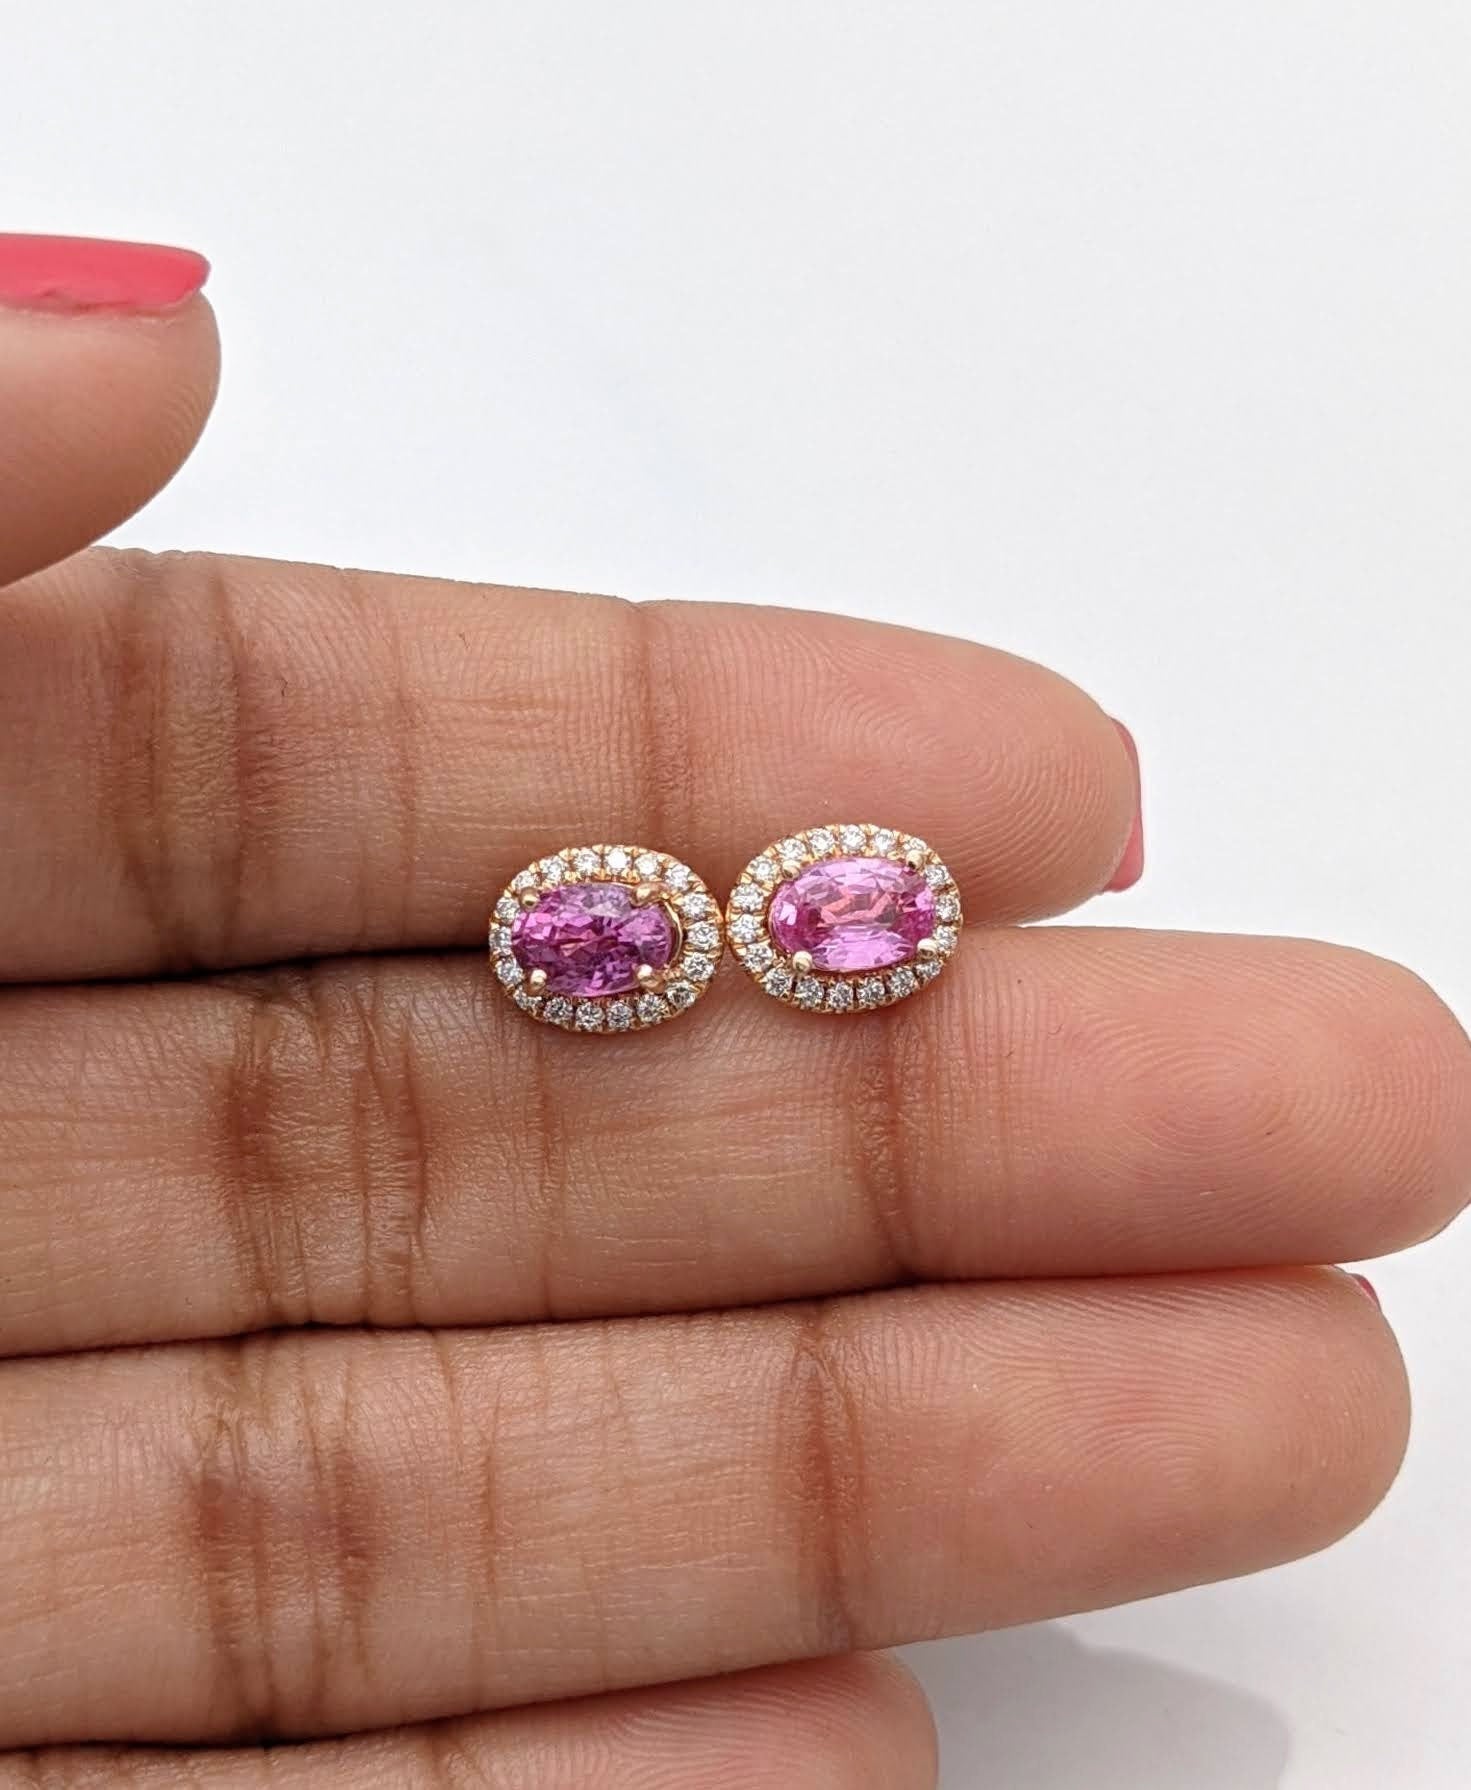 Stud Earrings-Adorable Pink Sapphire Studs with a Natural Diamond Halo in Solid 14k Rose, Yellow or White Gold | Oval 6x4mm | Minimalist Gemstone Earrings - NNJGemstones